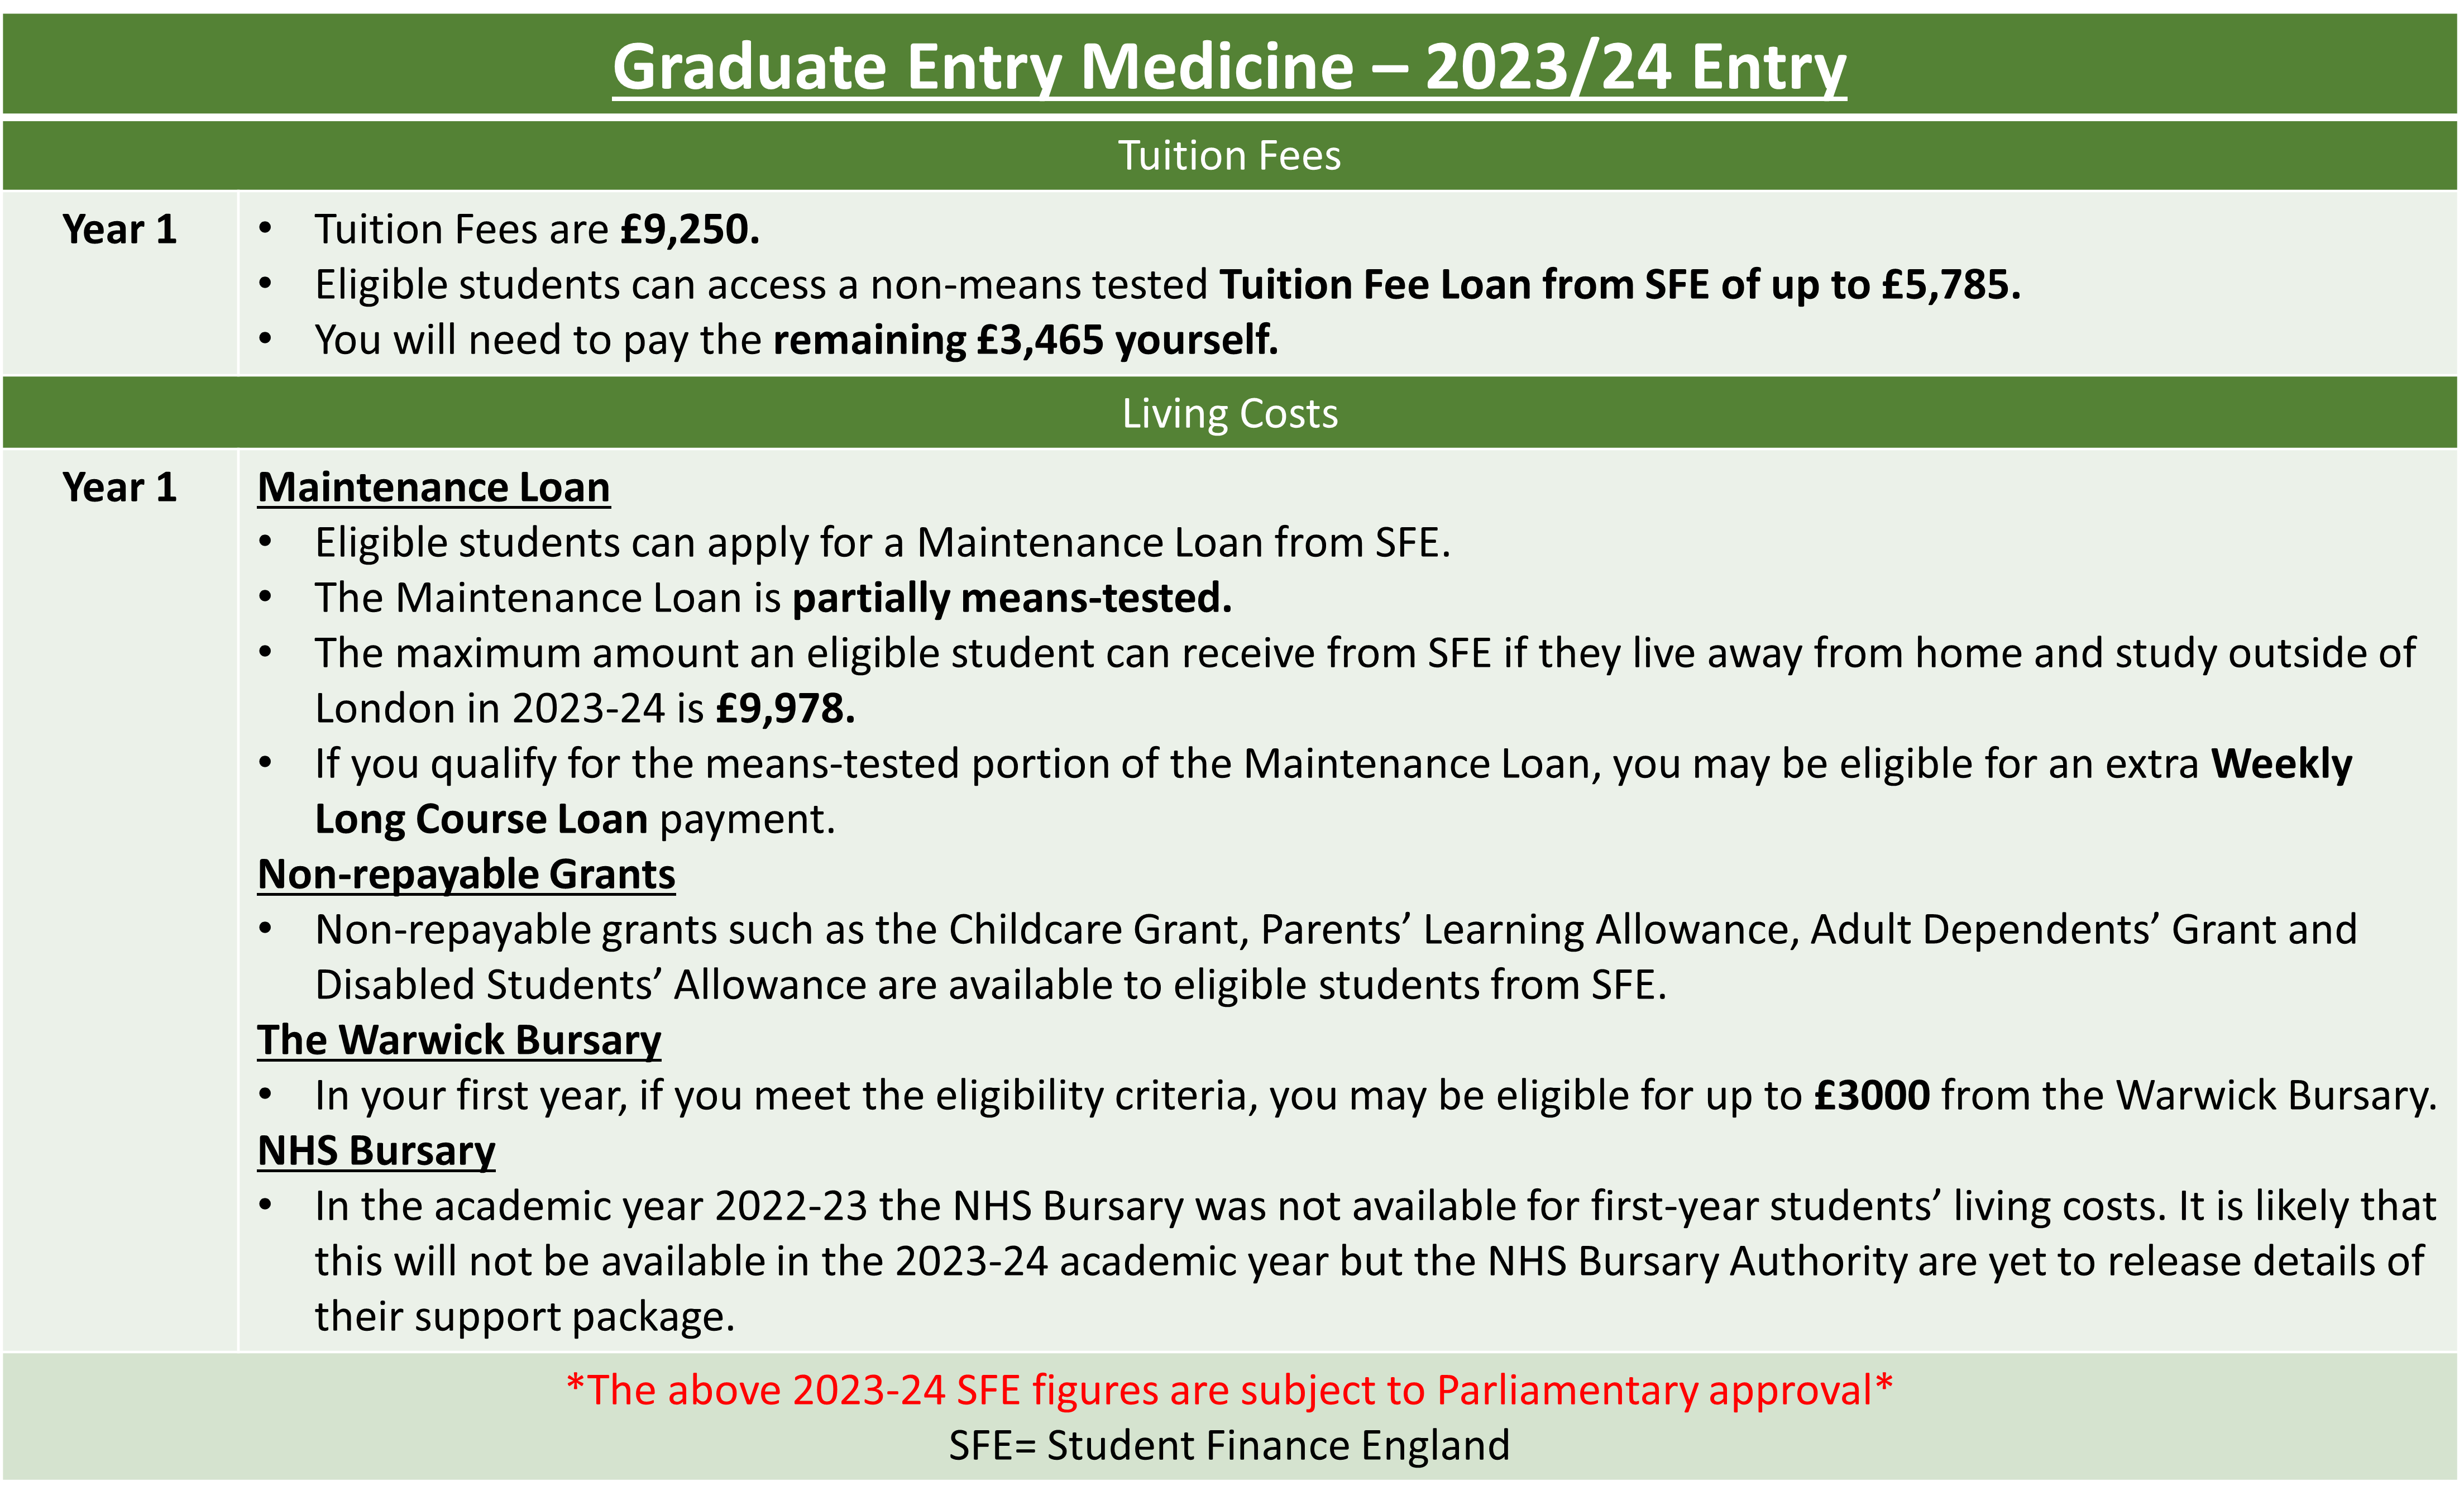 A table to demonstrate the tuition fees and financial support for the 2023-2024 academic year for graduate entry medicine (year 1). SFE figures subject to parliamentary approval.